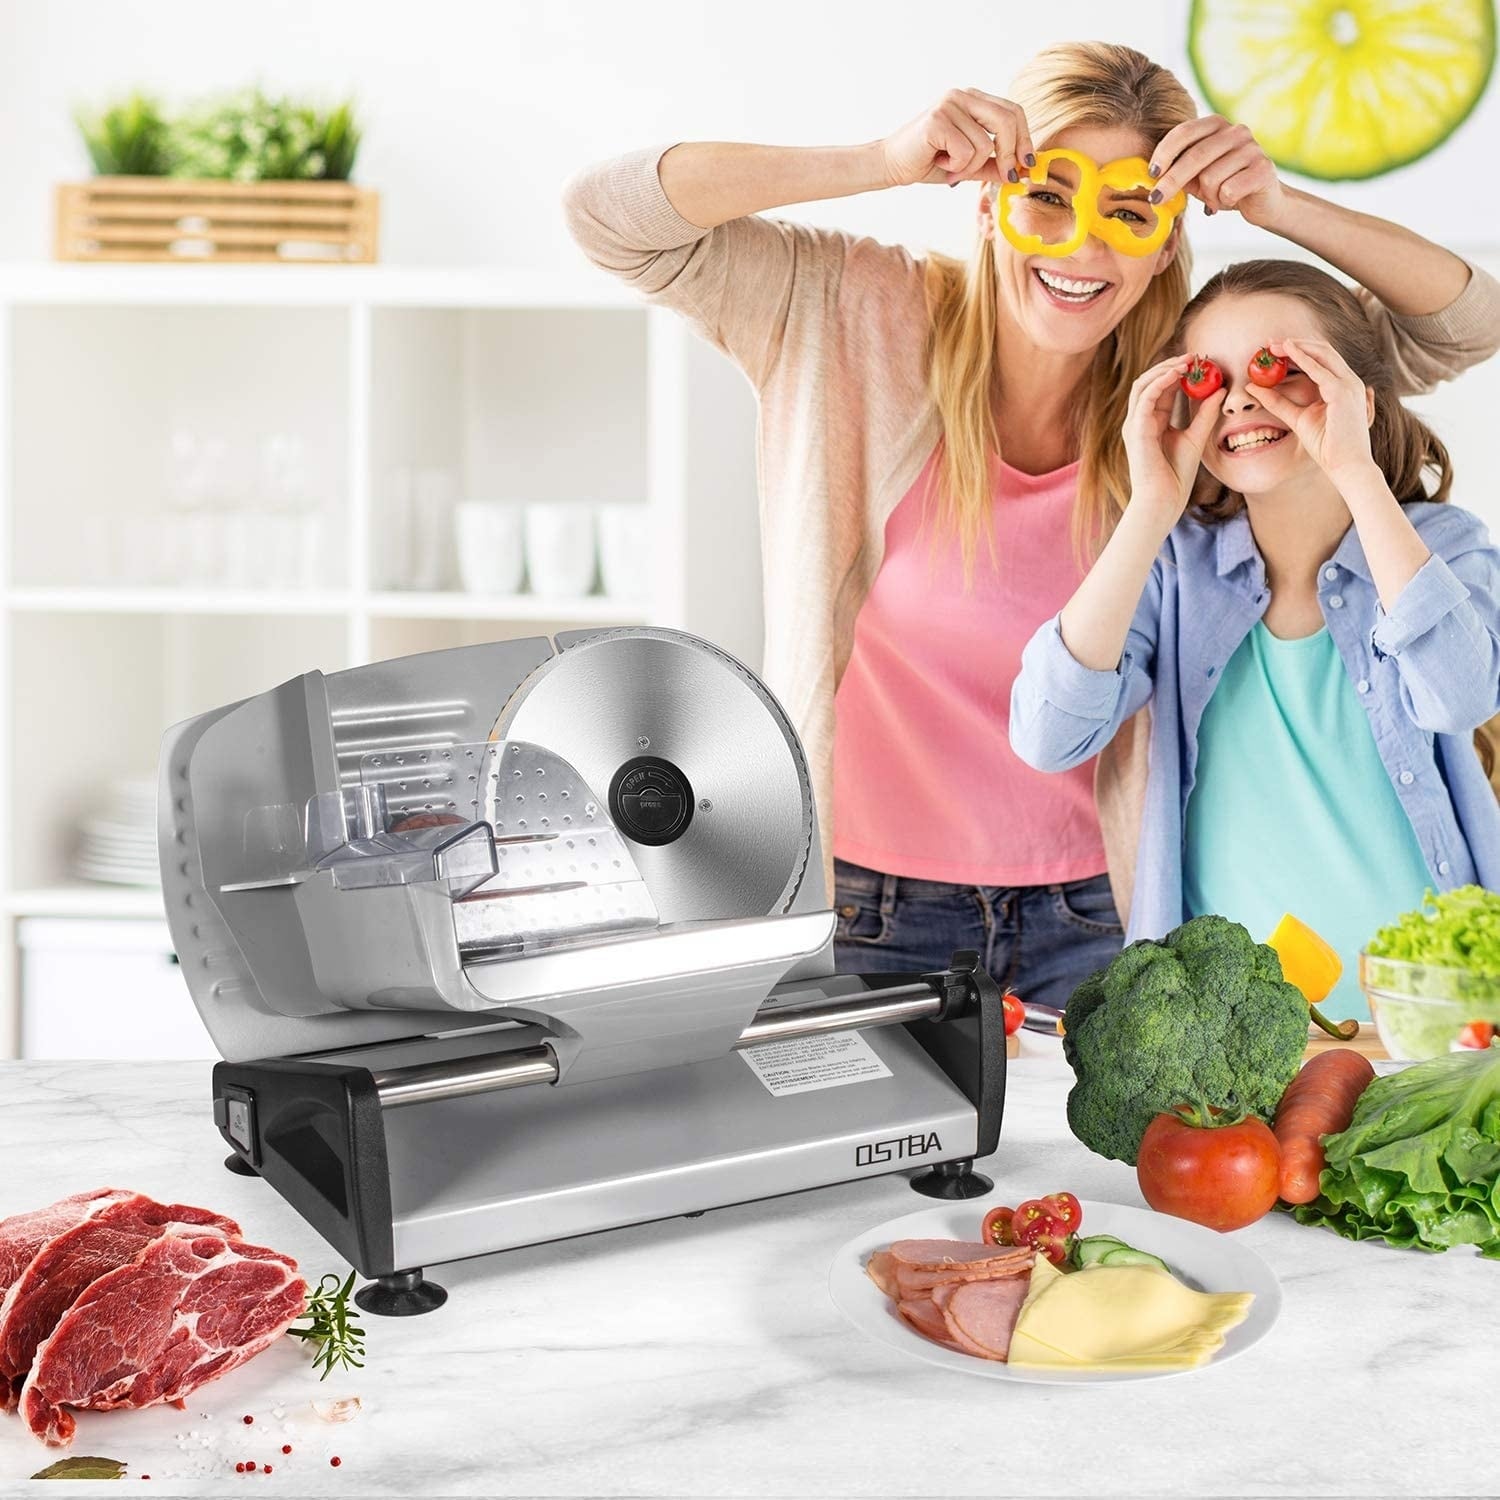 https://ak1.ostkcdn.com/images/products/is/images/direct/6cac29397295c0b96b8c3ec12f0d12e61a88b0a9/OSTBA-Electric-Meat-Slicer-with-Child-Lock-Protection-%28150W%29.jpg